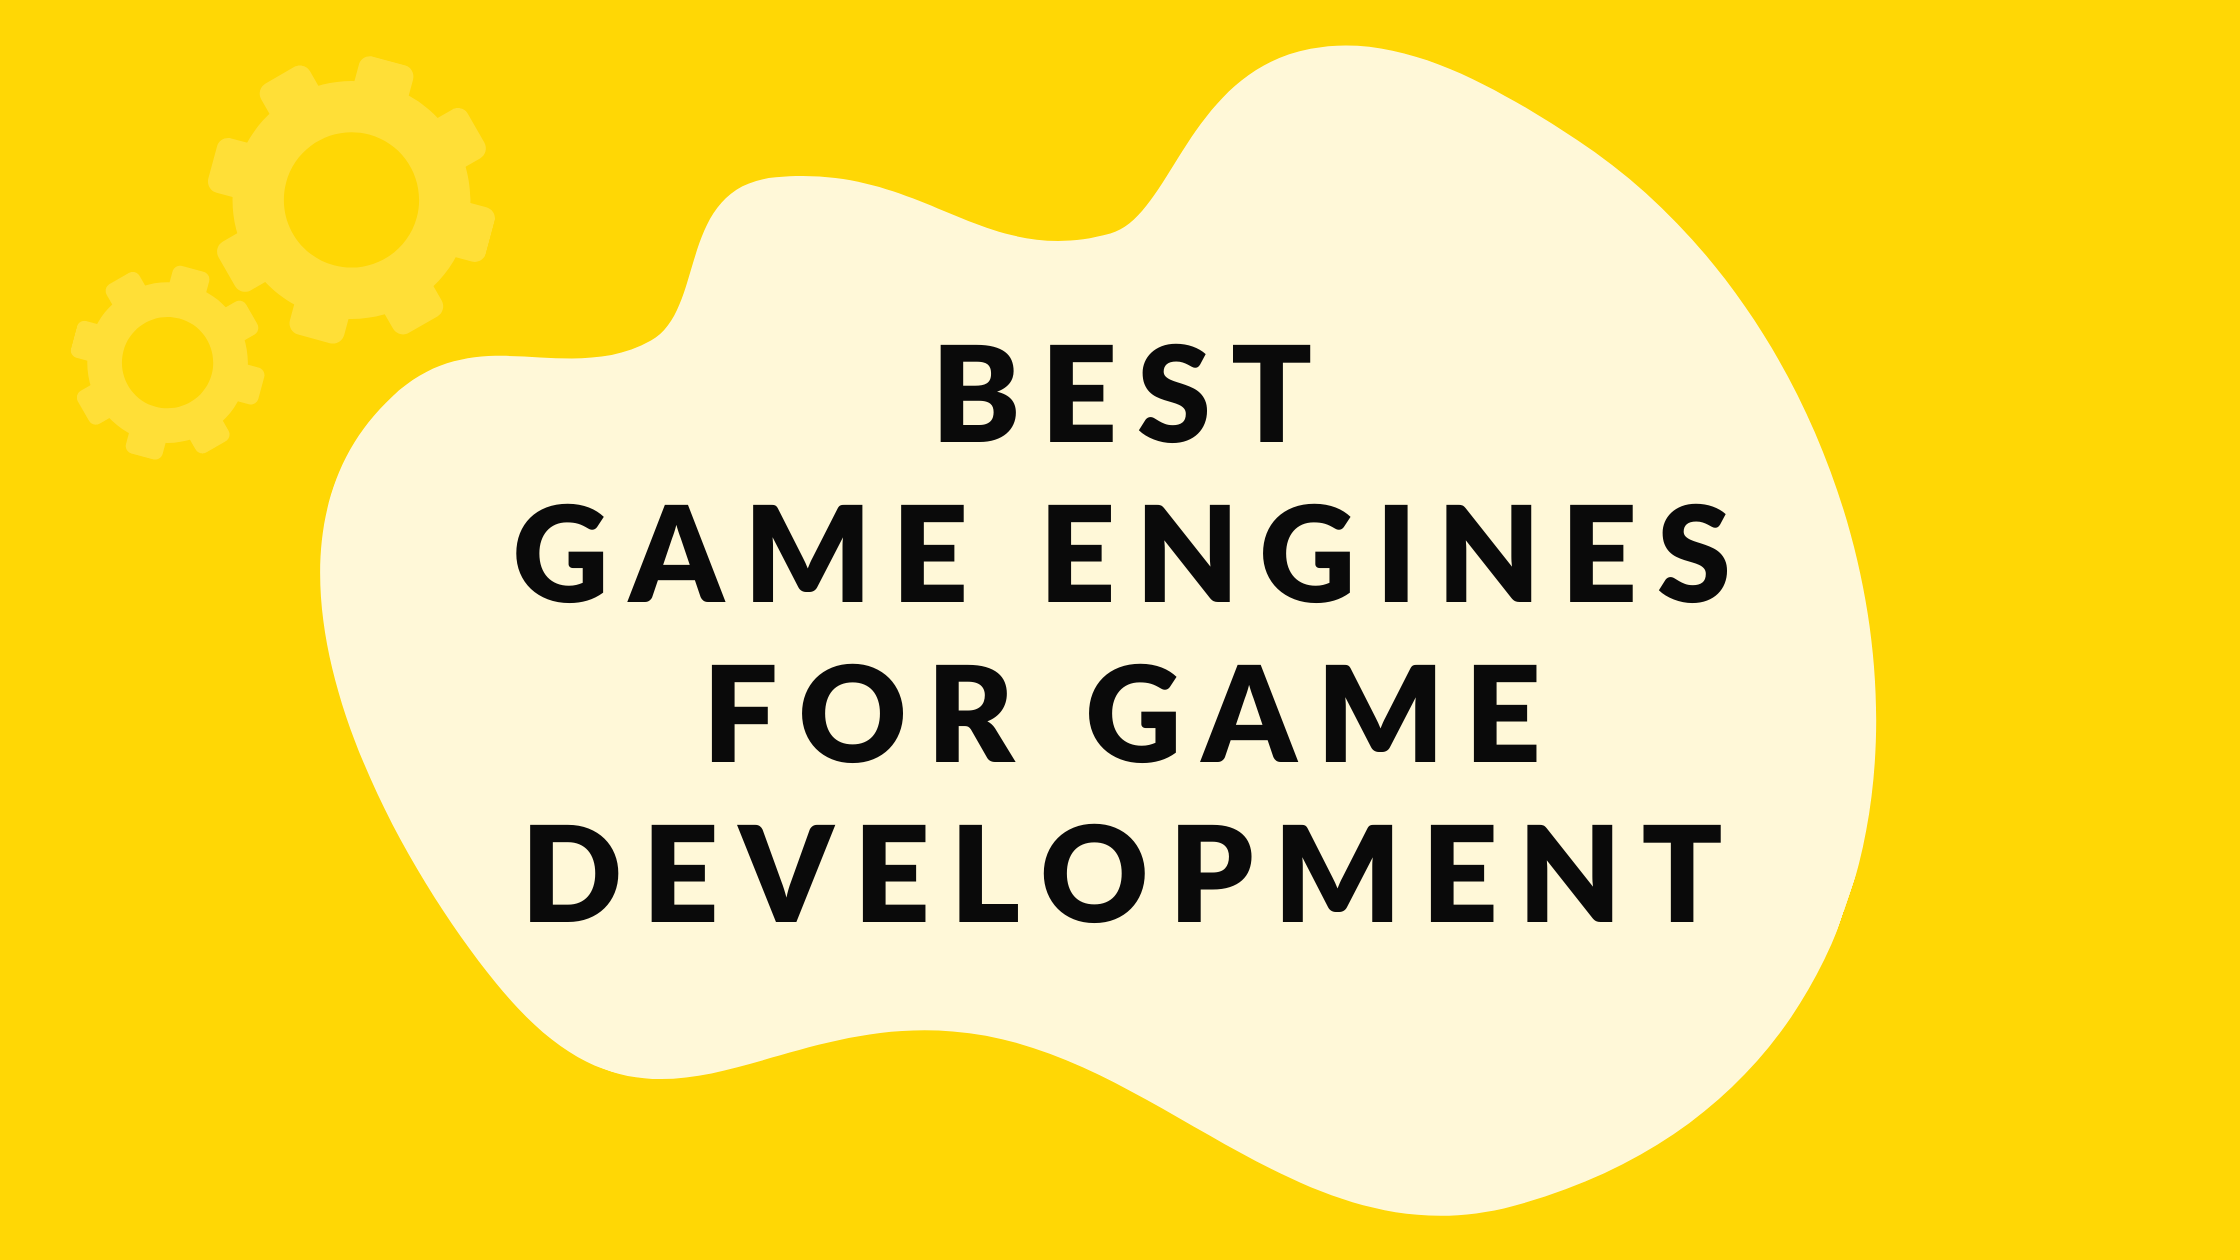 Top Game Engines